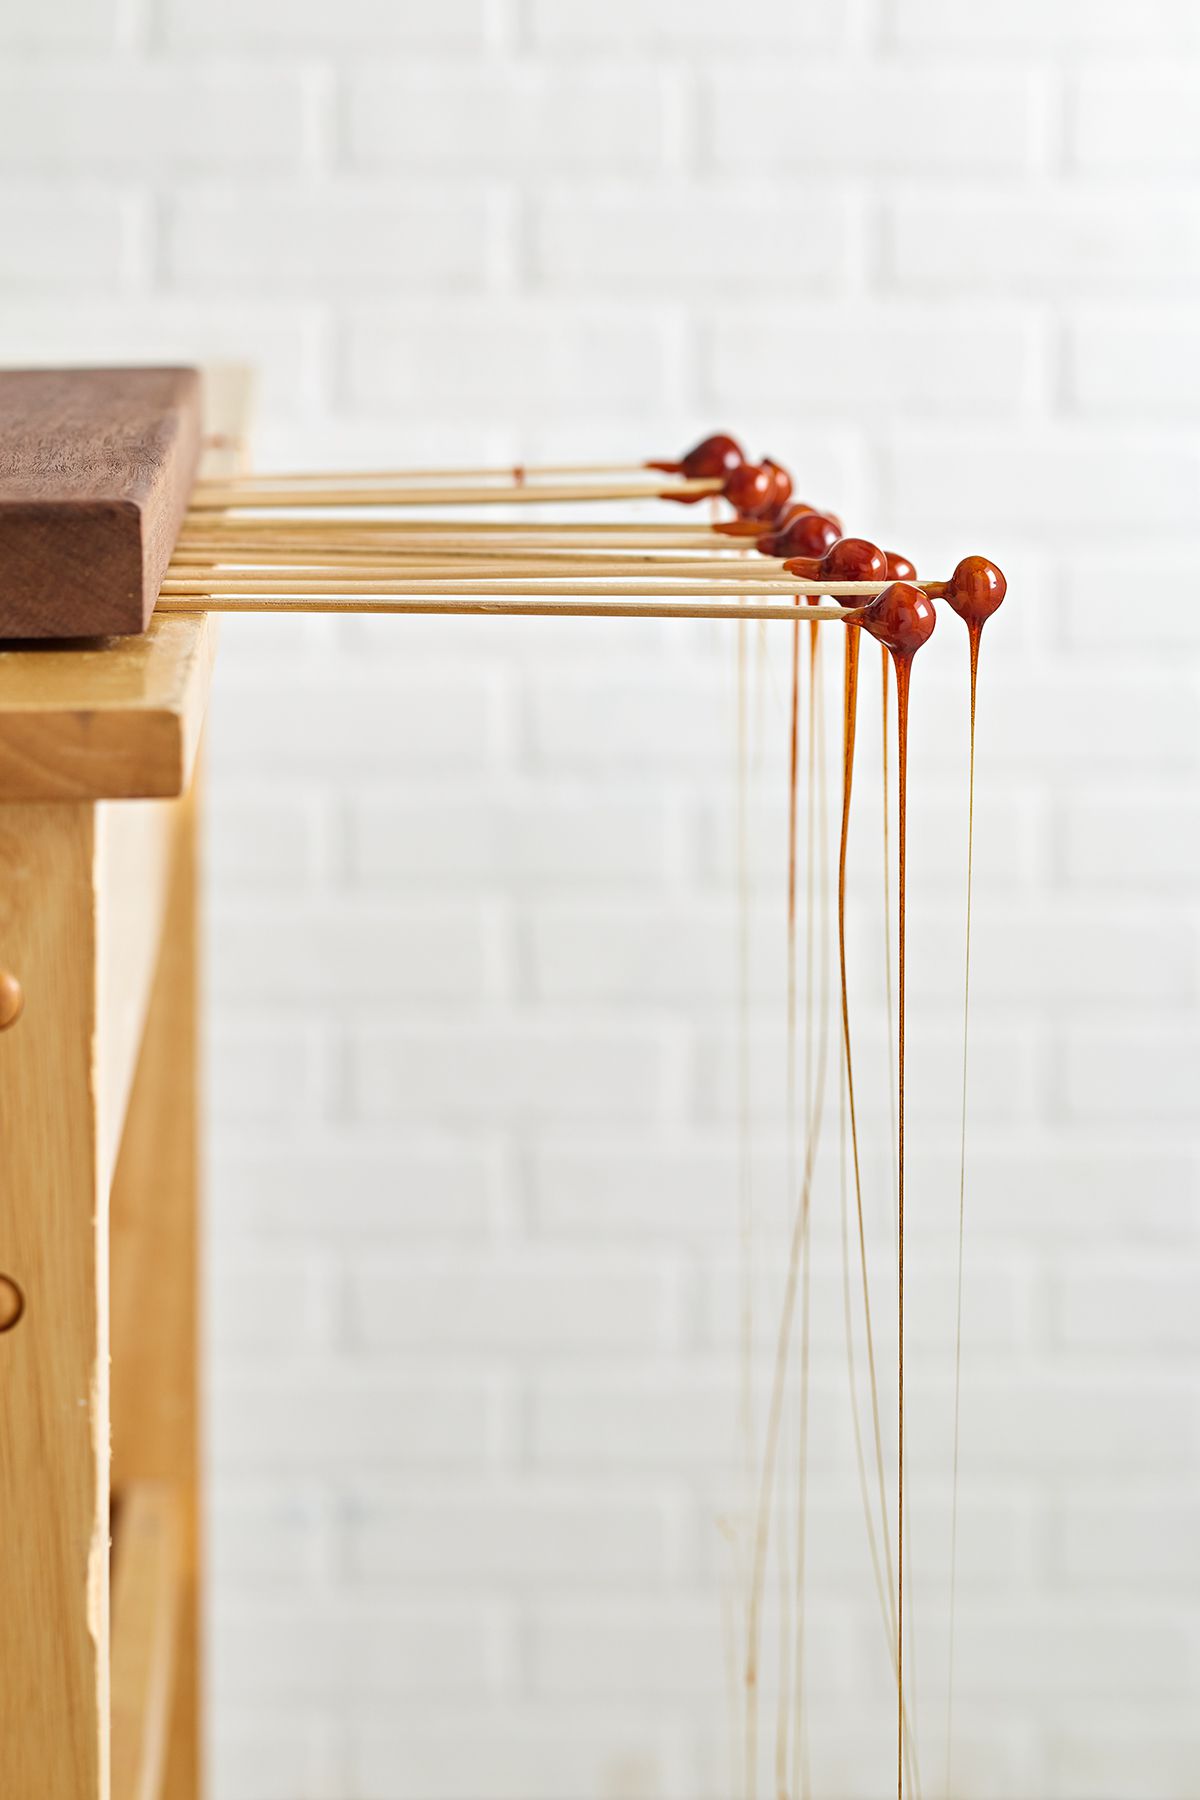 Hazelnuts on wooden skewers covered in caramel dripping onto the ground